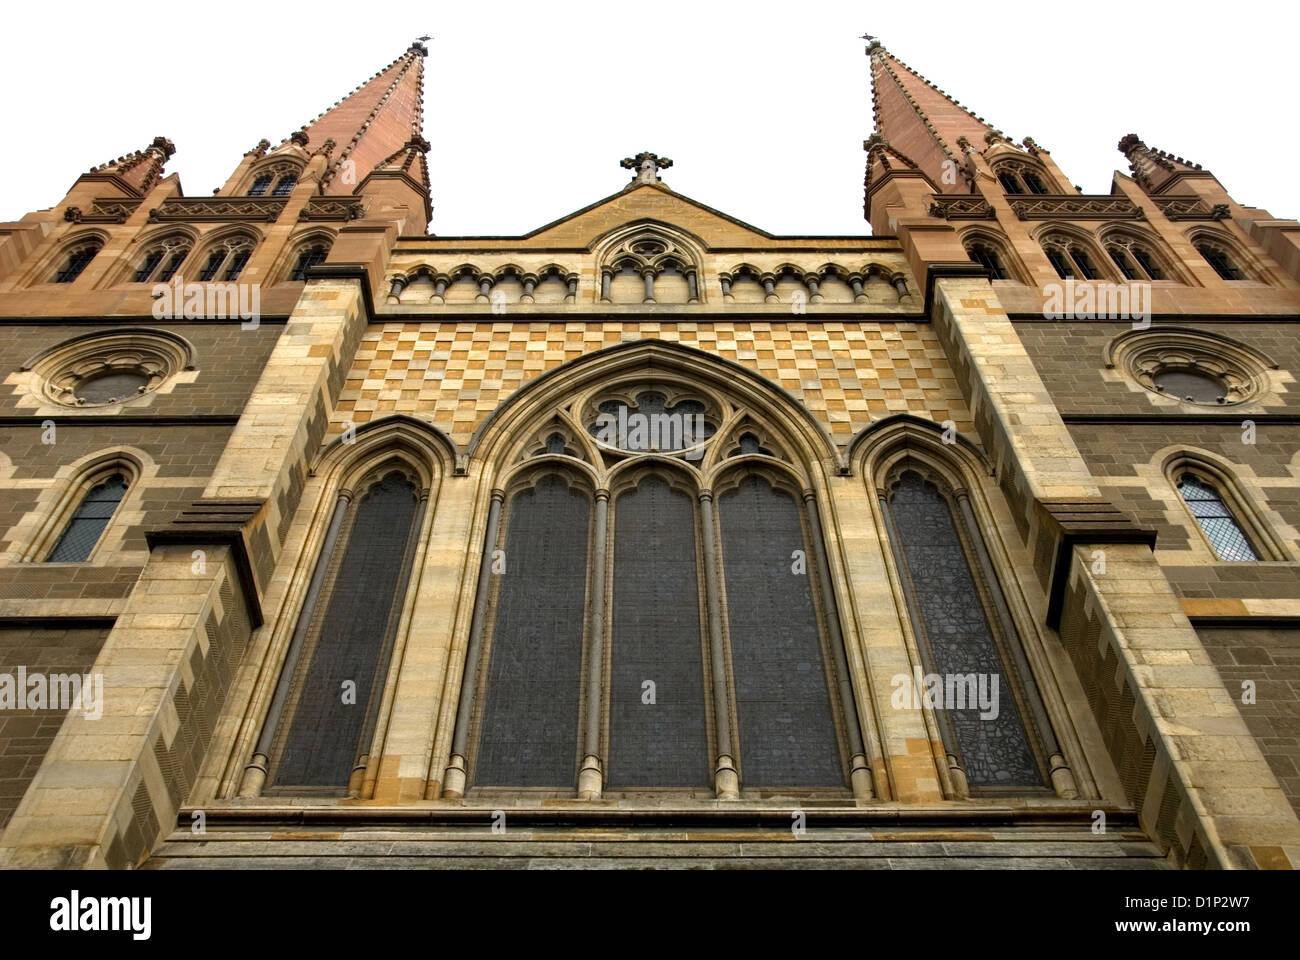 The facade of St Paul's Cathedral, Melbourne, Victoria, Australia Stock Photo